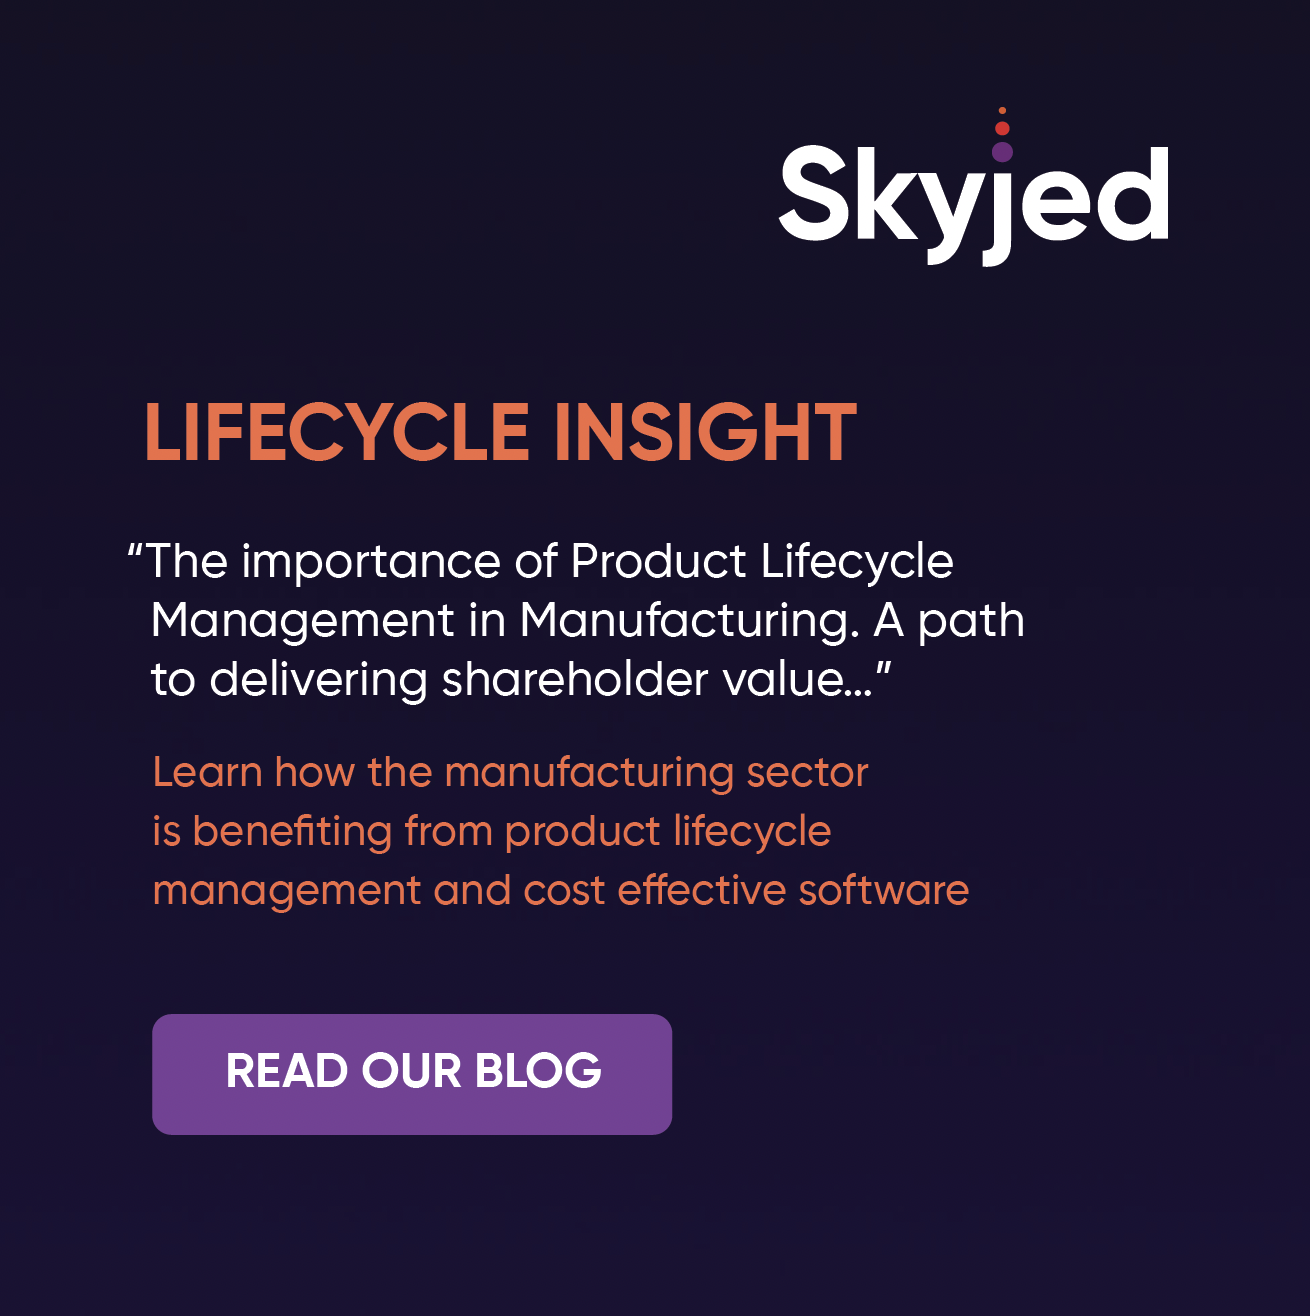 The importance of Product Lifecycle Management in Manufacturing